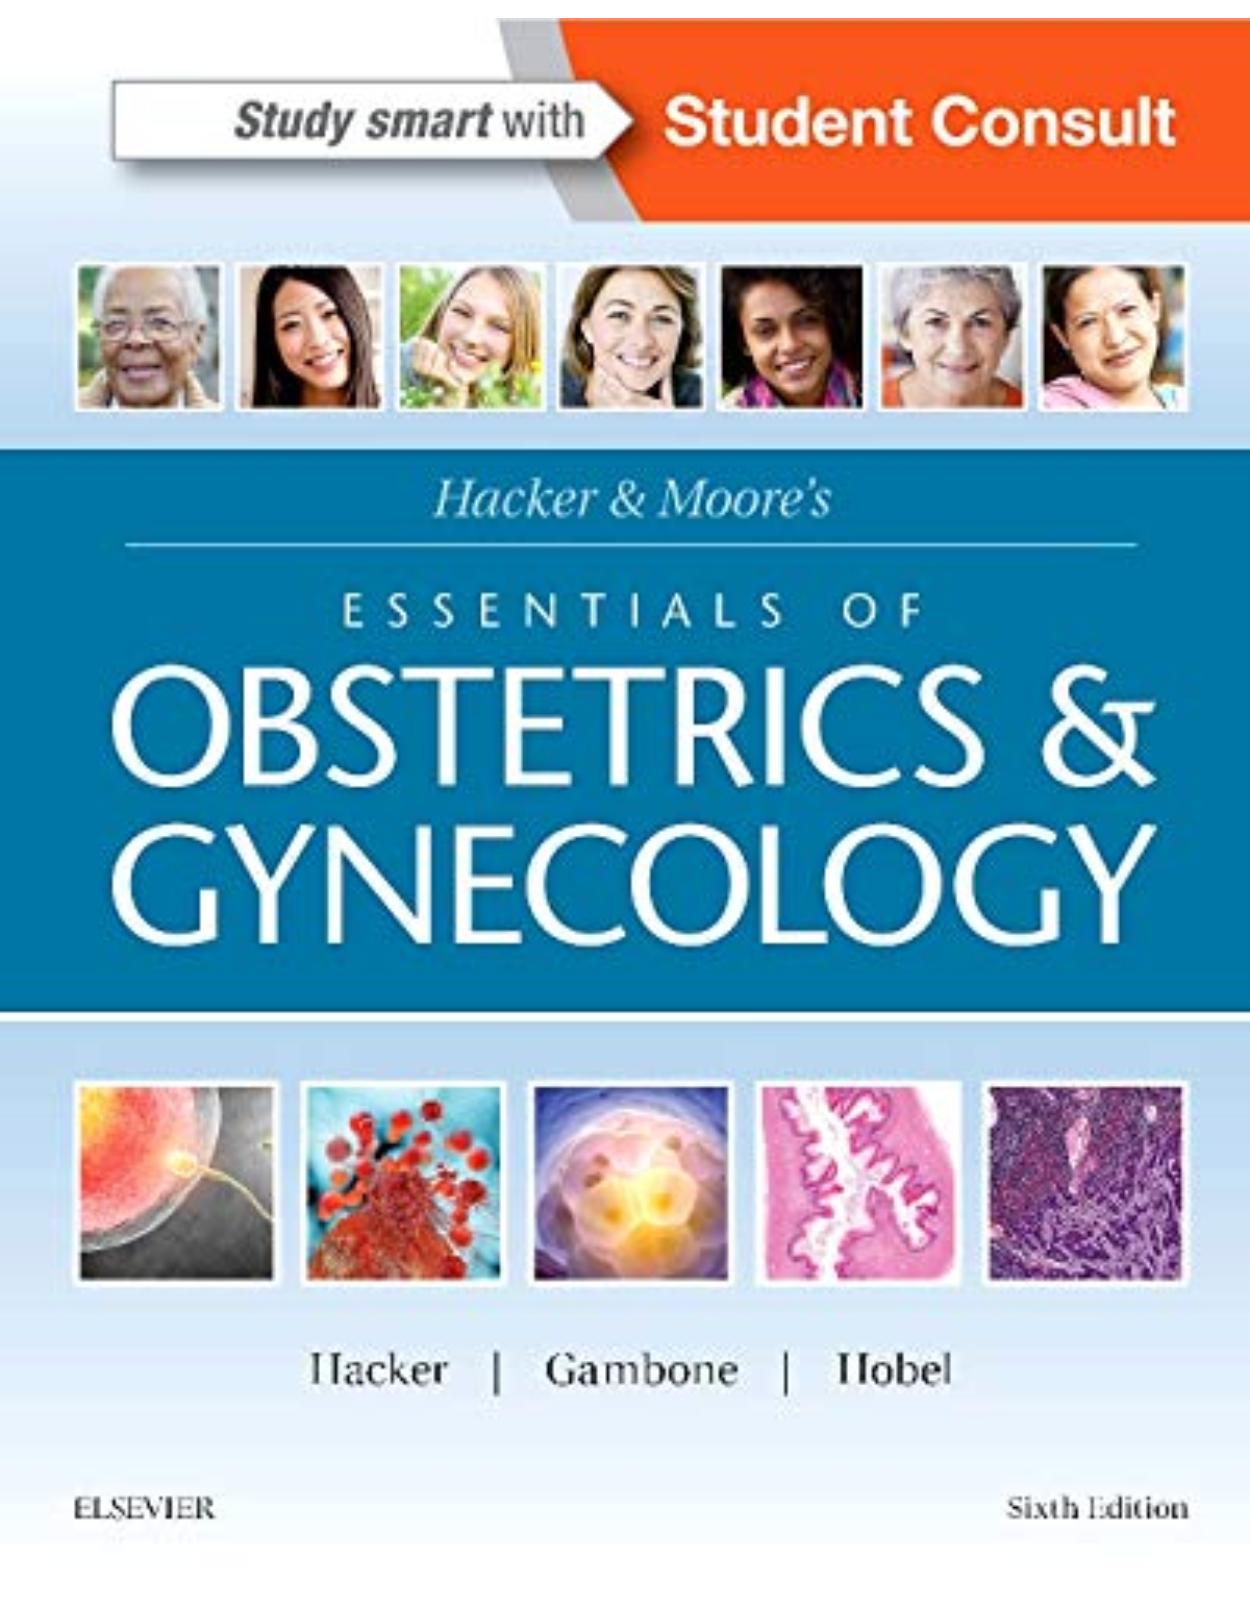 Hacker & Moore's Essentials of Obstetrics and Gynecology, 6e